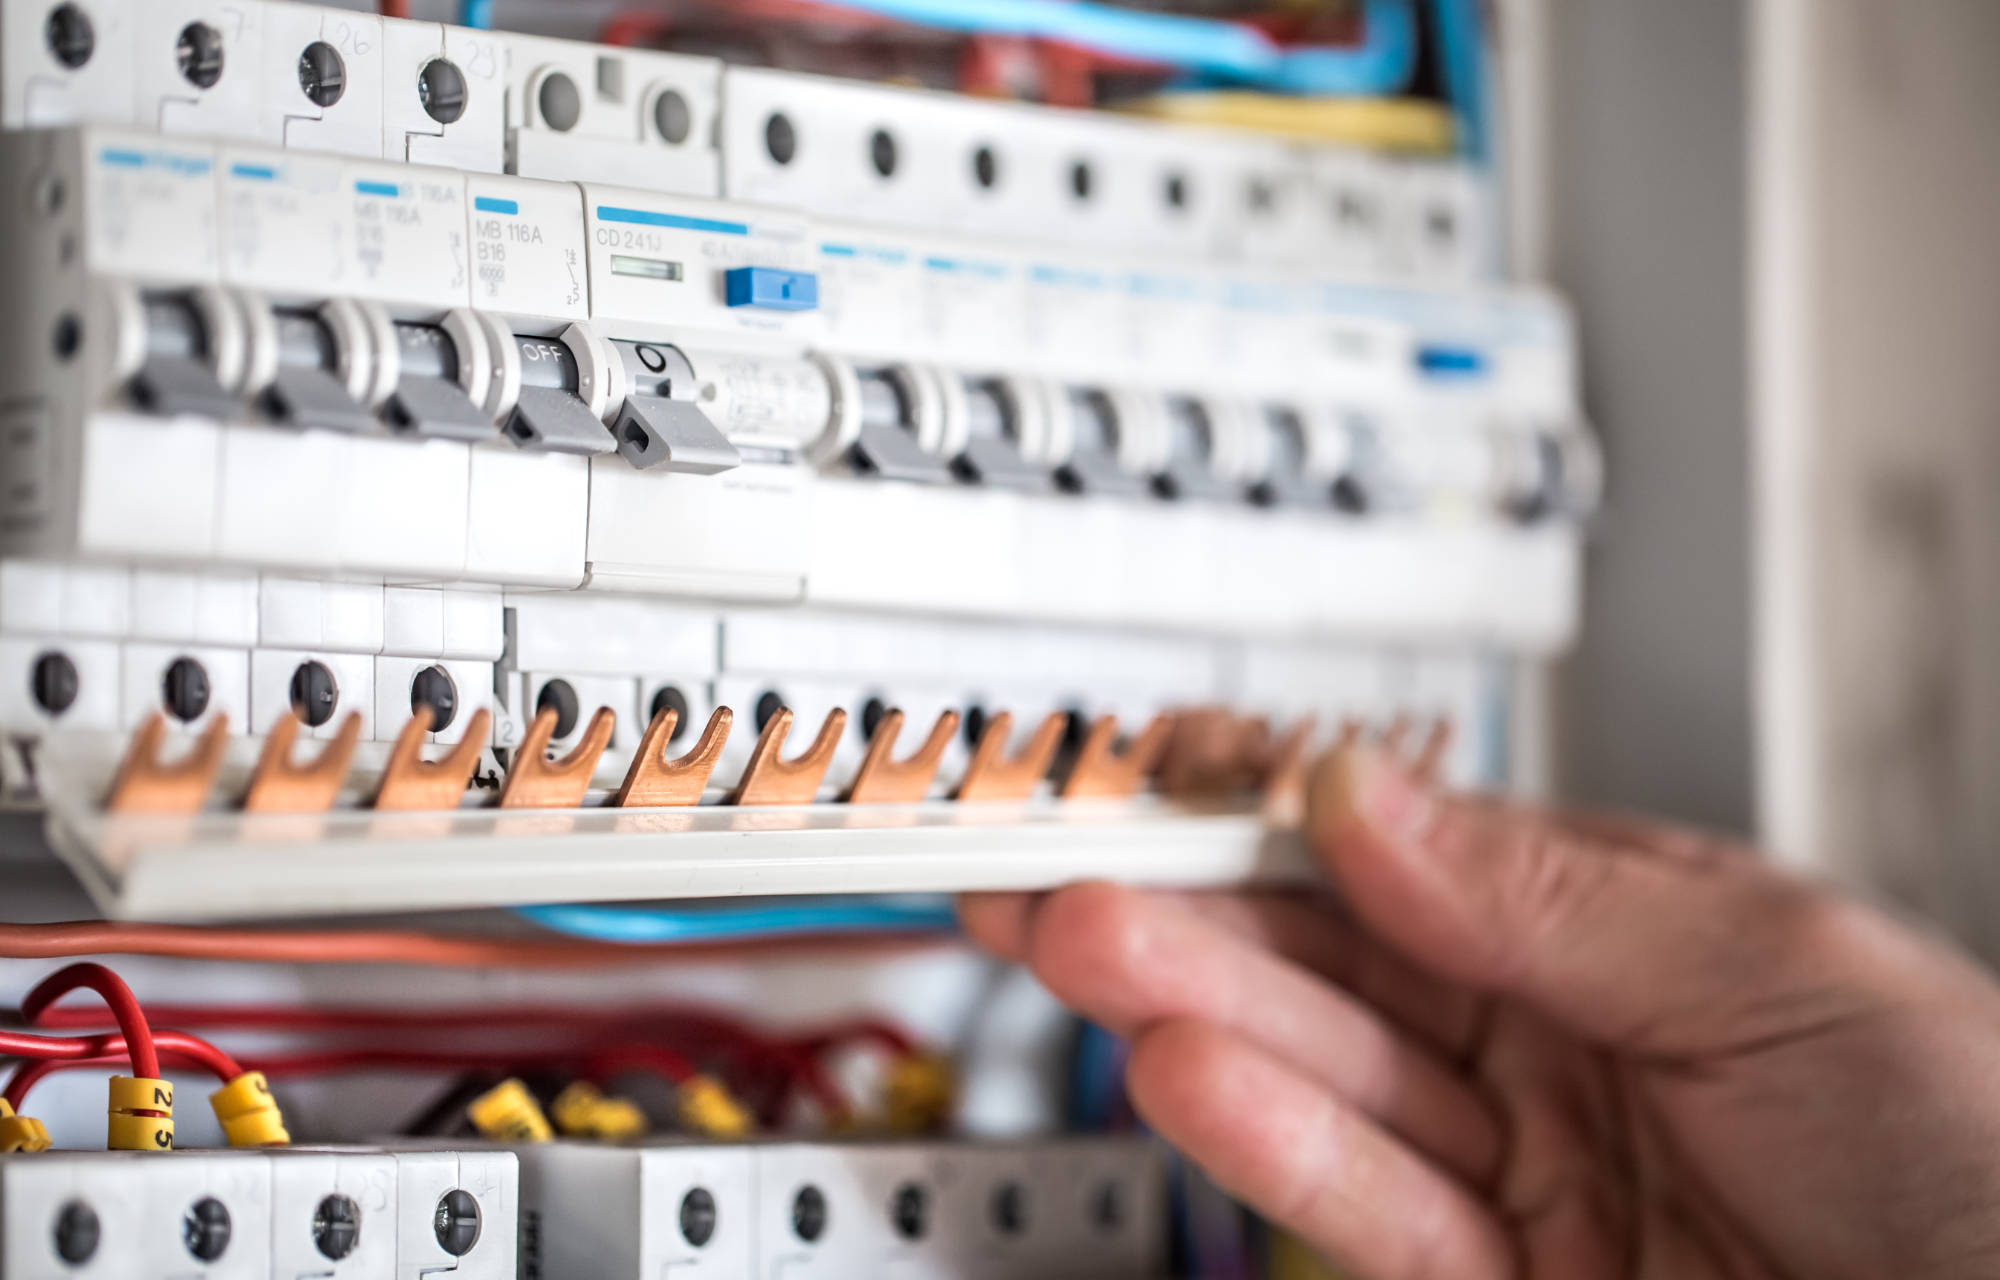 man-electrical-technician-working-switchboard-with-fuses-installation-connection-electrical-equipment-close-up.jpg